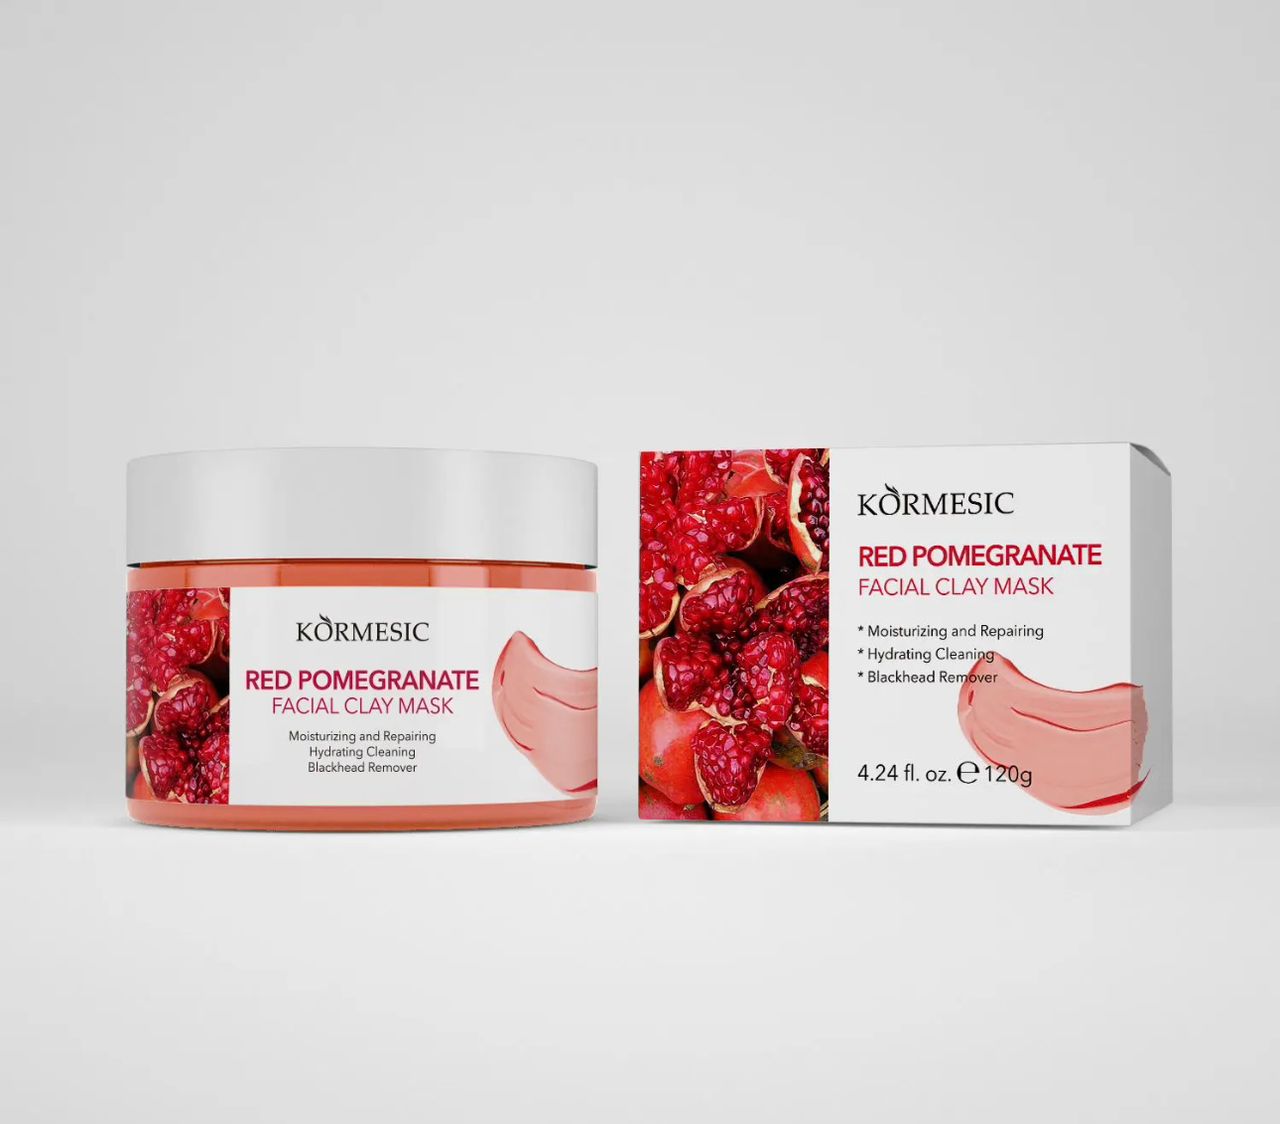 KORMESIC Red pomegranate Faacial Clay Mask